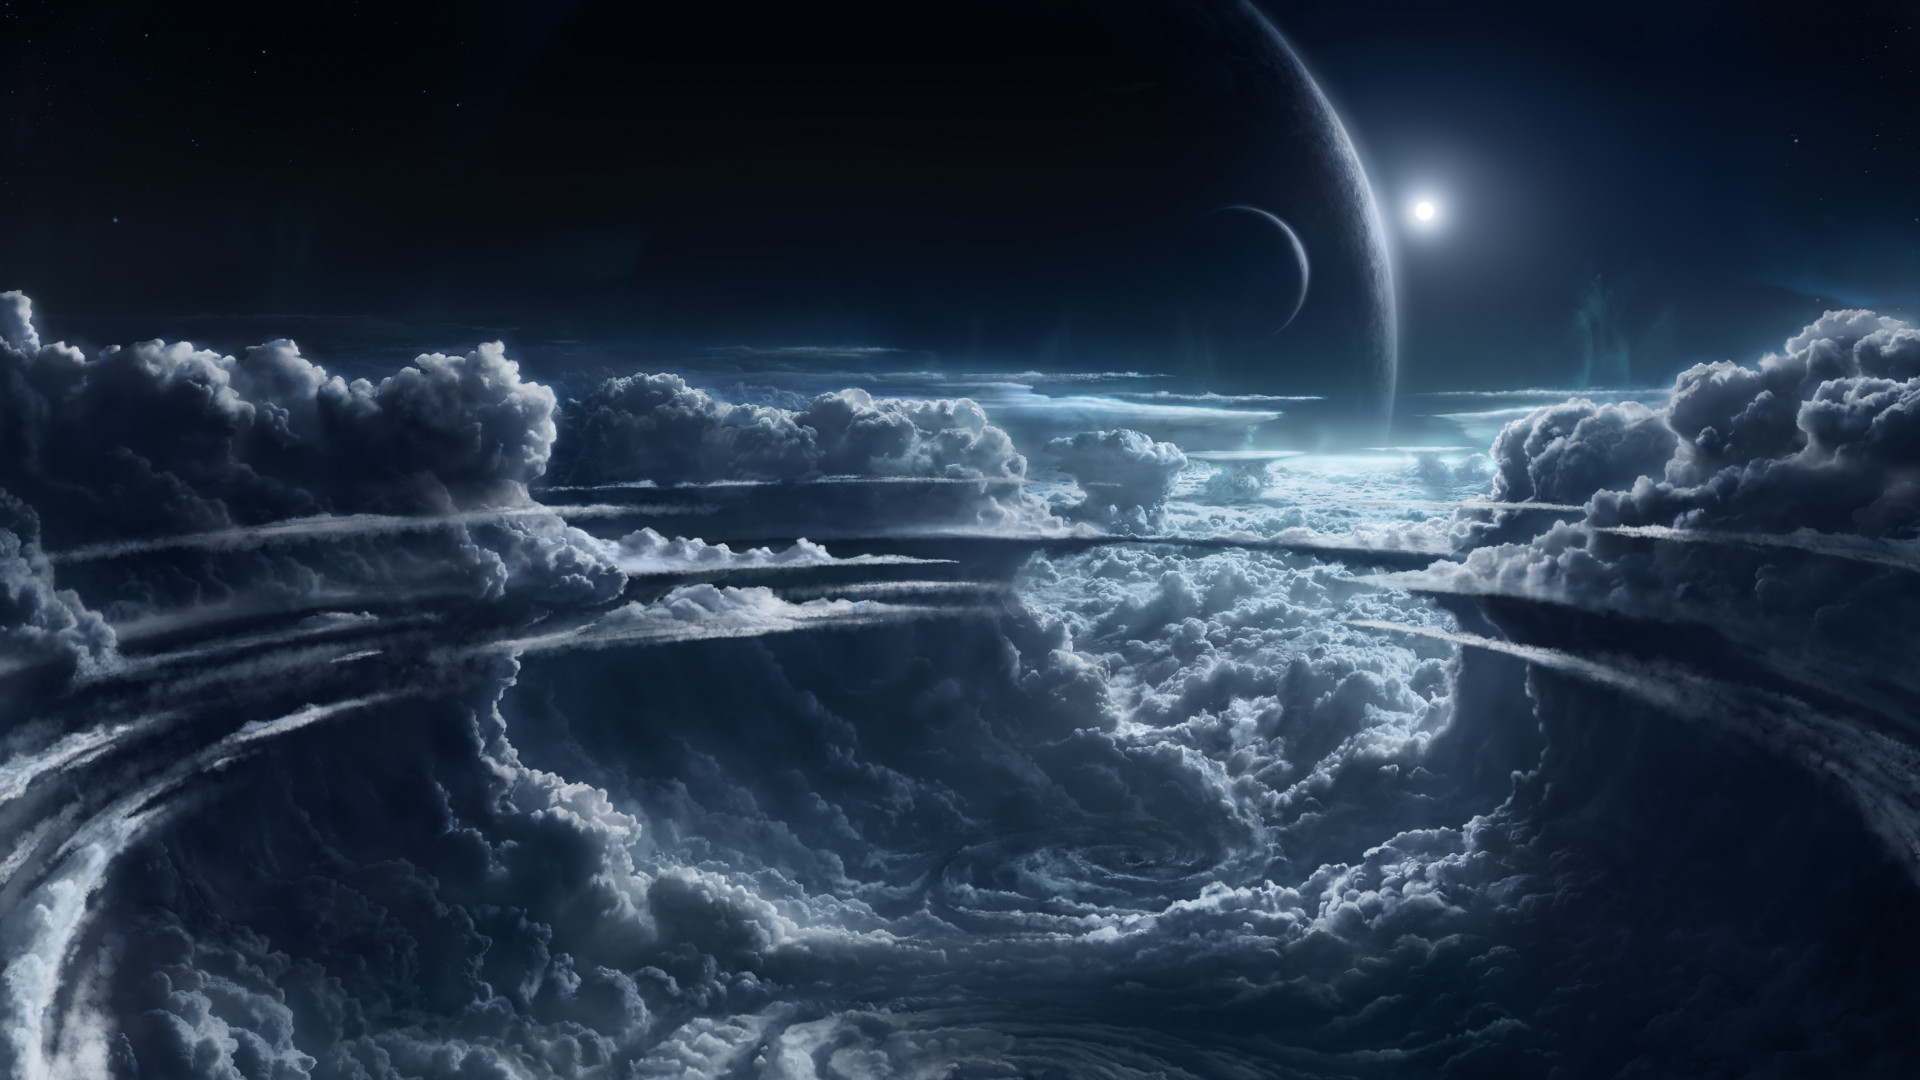 Wallpaper Sky, 5k, 4k wallpaper, clouds, planet, light, atmosphere,  cyclone, white, blue, Nature #732 - Page 2